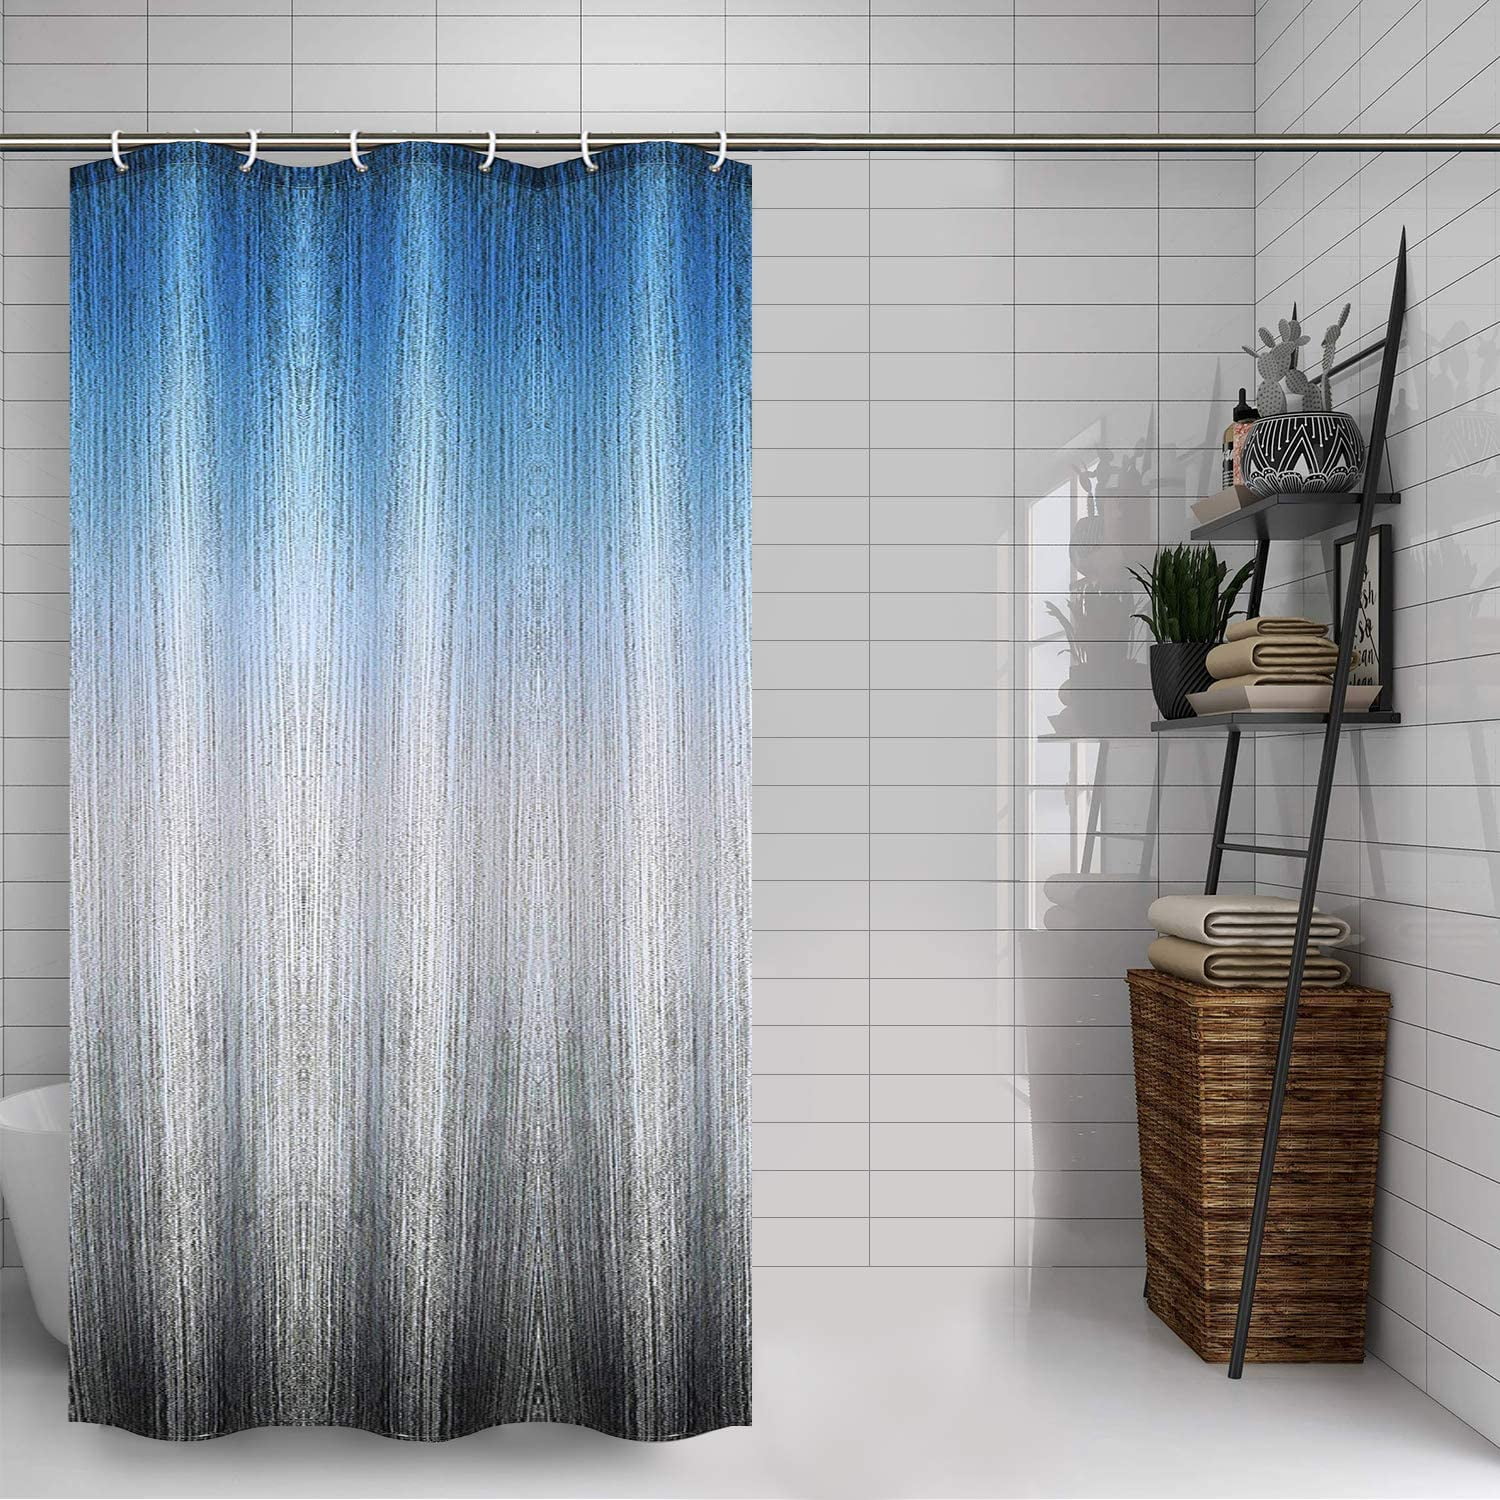 Fabric Shower Curtain Ombre, Ombre Shower Curtain Blue